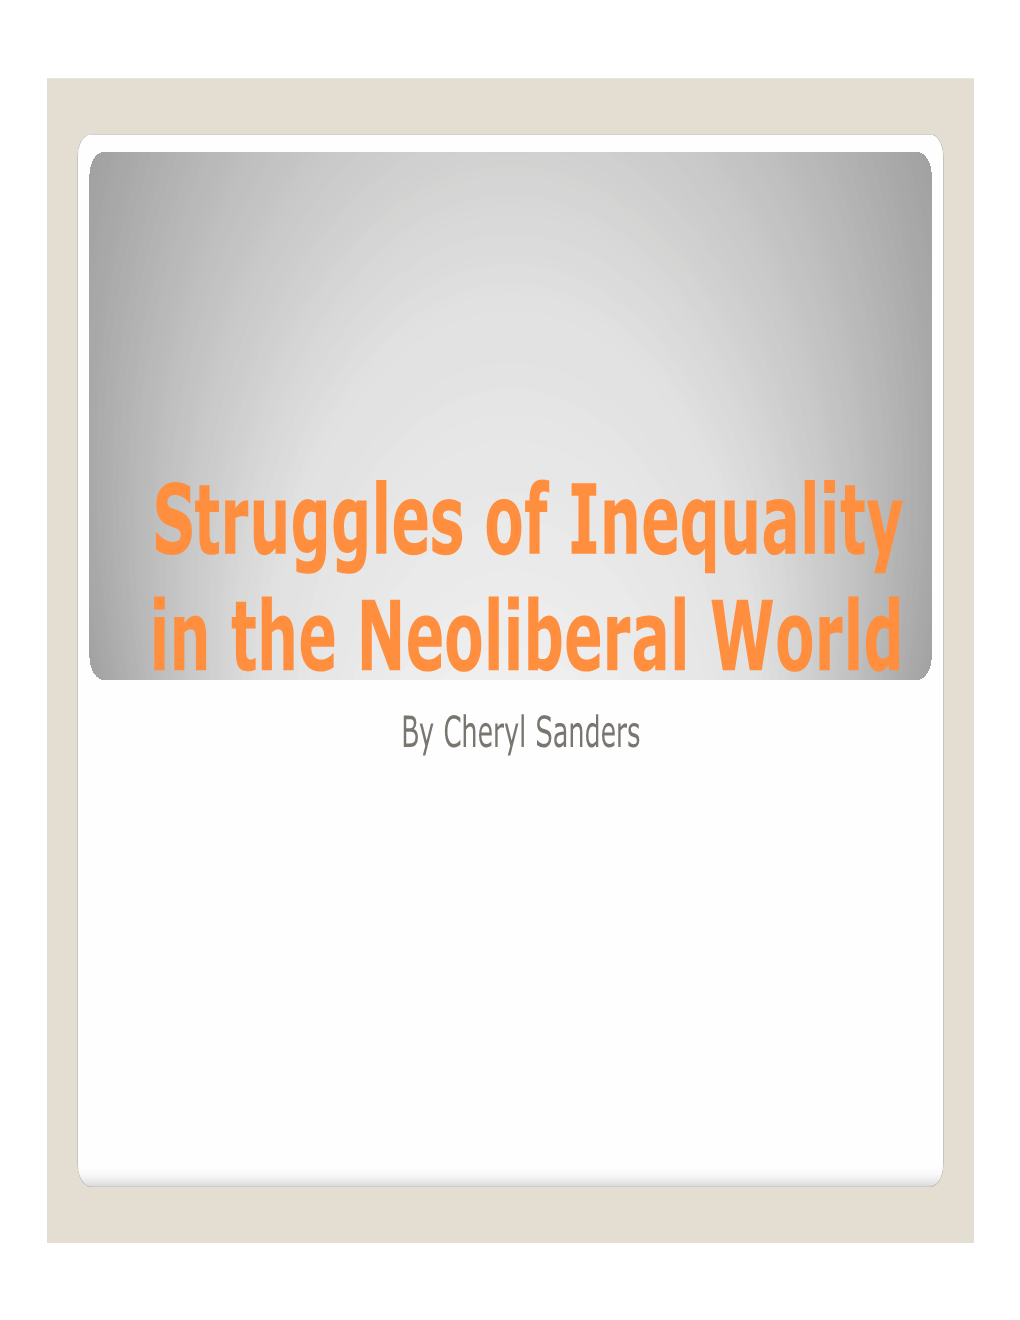 Struggles of Social Inequalities in the Neoliberal World